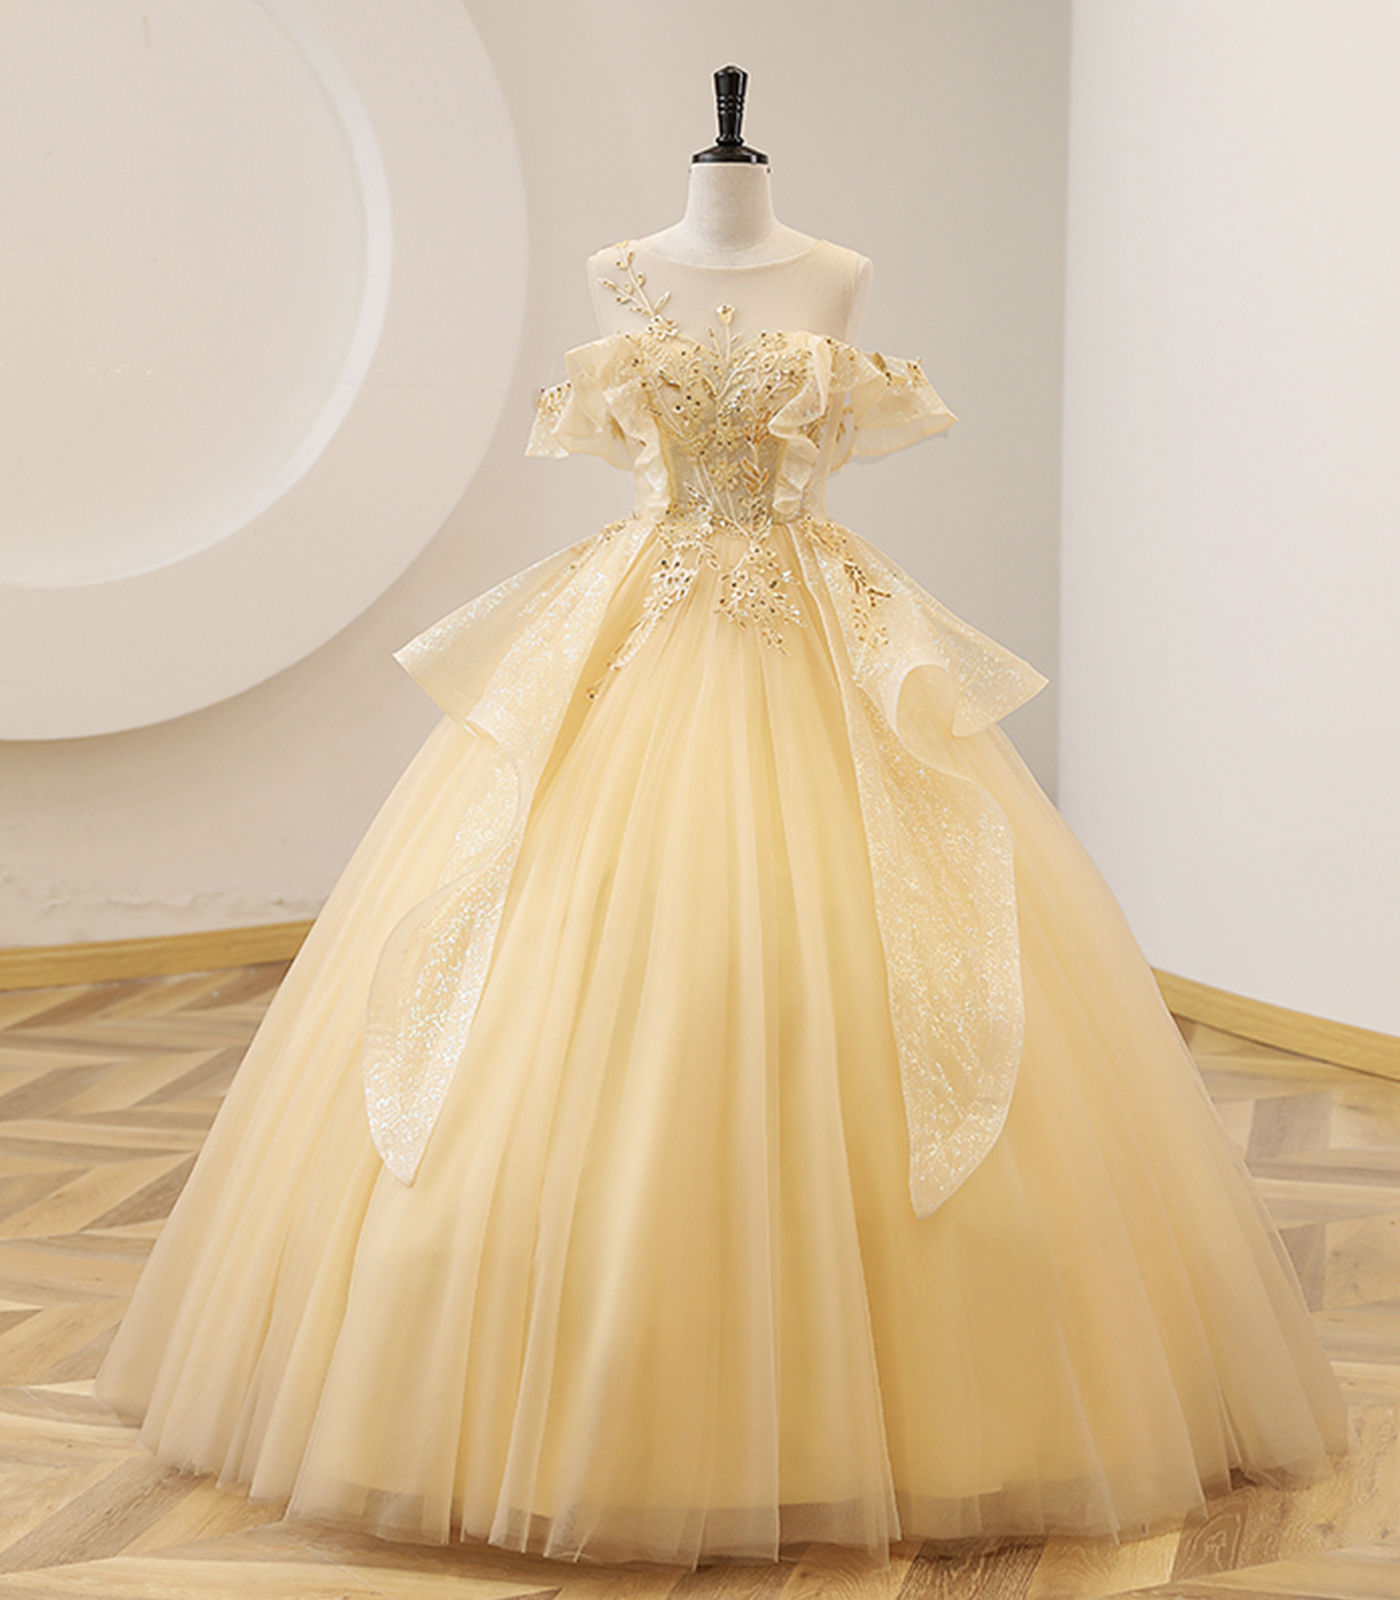 Yellow Ball Gown Princess Dress — The Fairy's Tale